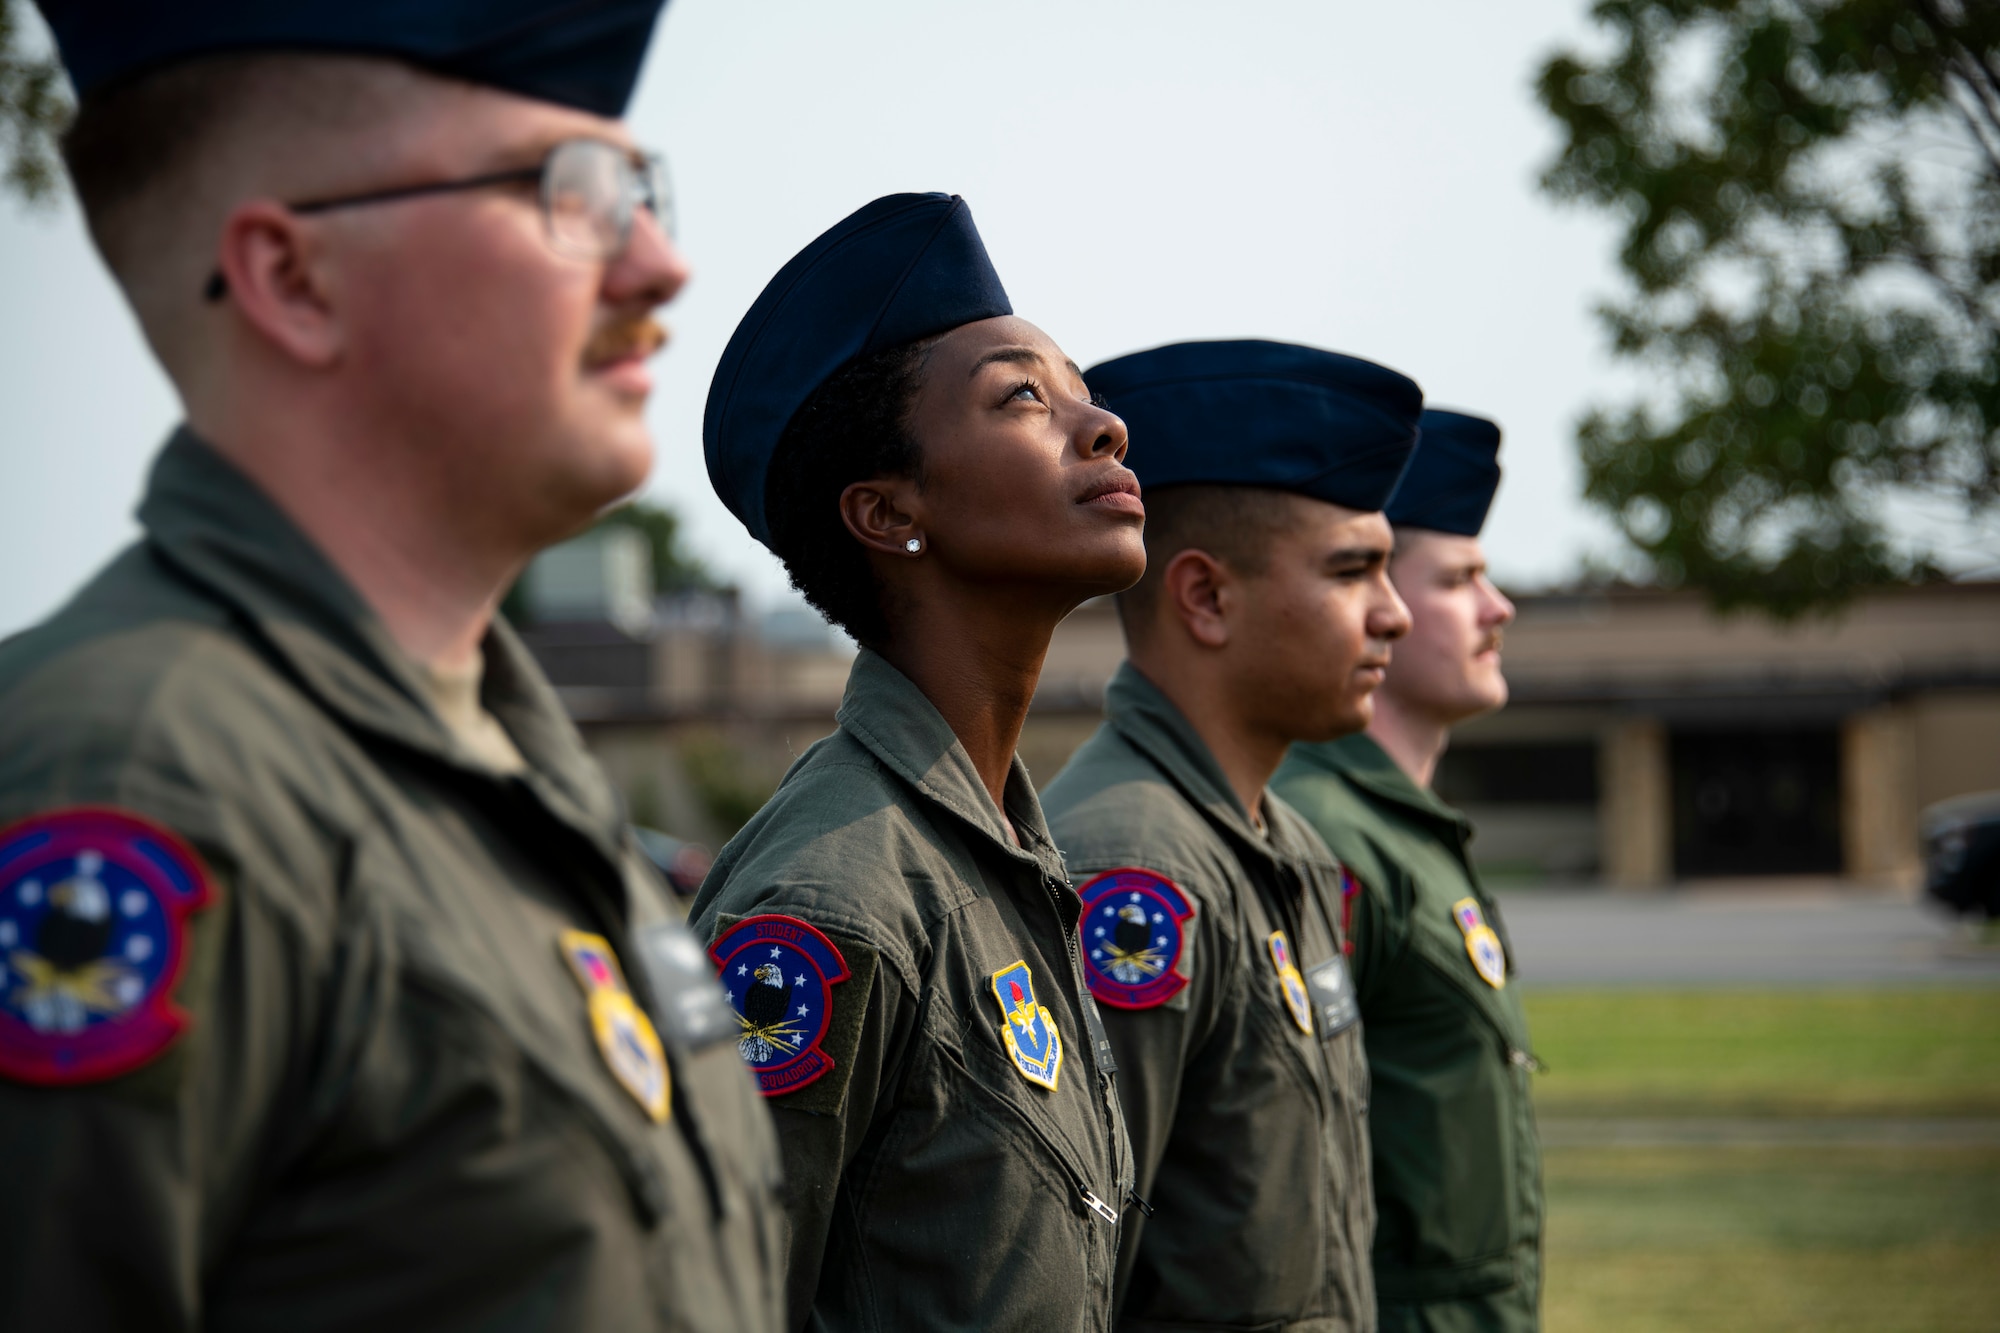 97th Training Squadron students stand at ease during a 9/11 remembrance ceremony at Altus Air Force Base, Oklahoma, Sept. 10, 2021. The ceremony was a precursor to the 97th Air Mobility Wing Remembrance Ceremony and was held to educate generations of younger Airmen on the significance of 9/11. (U.S. Air Force photo by Senior Airman Amanda Lovelace)